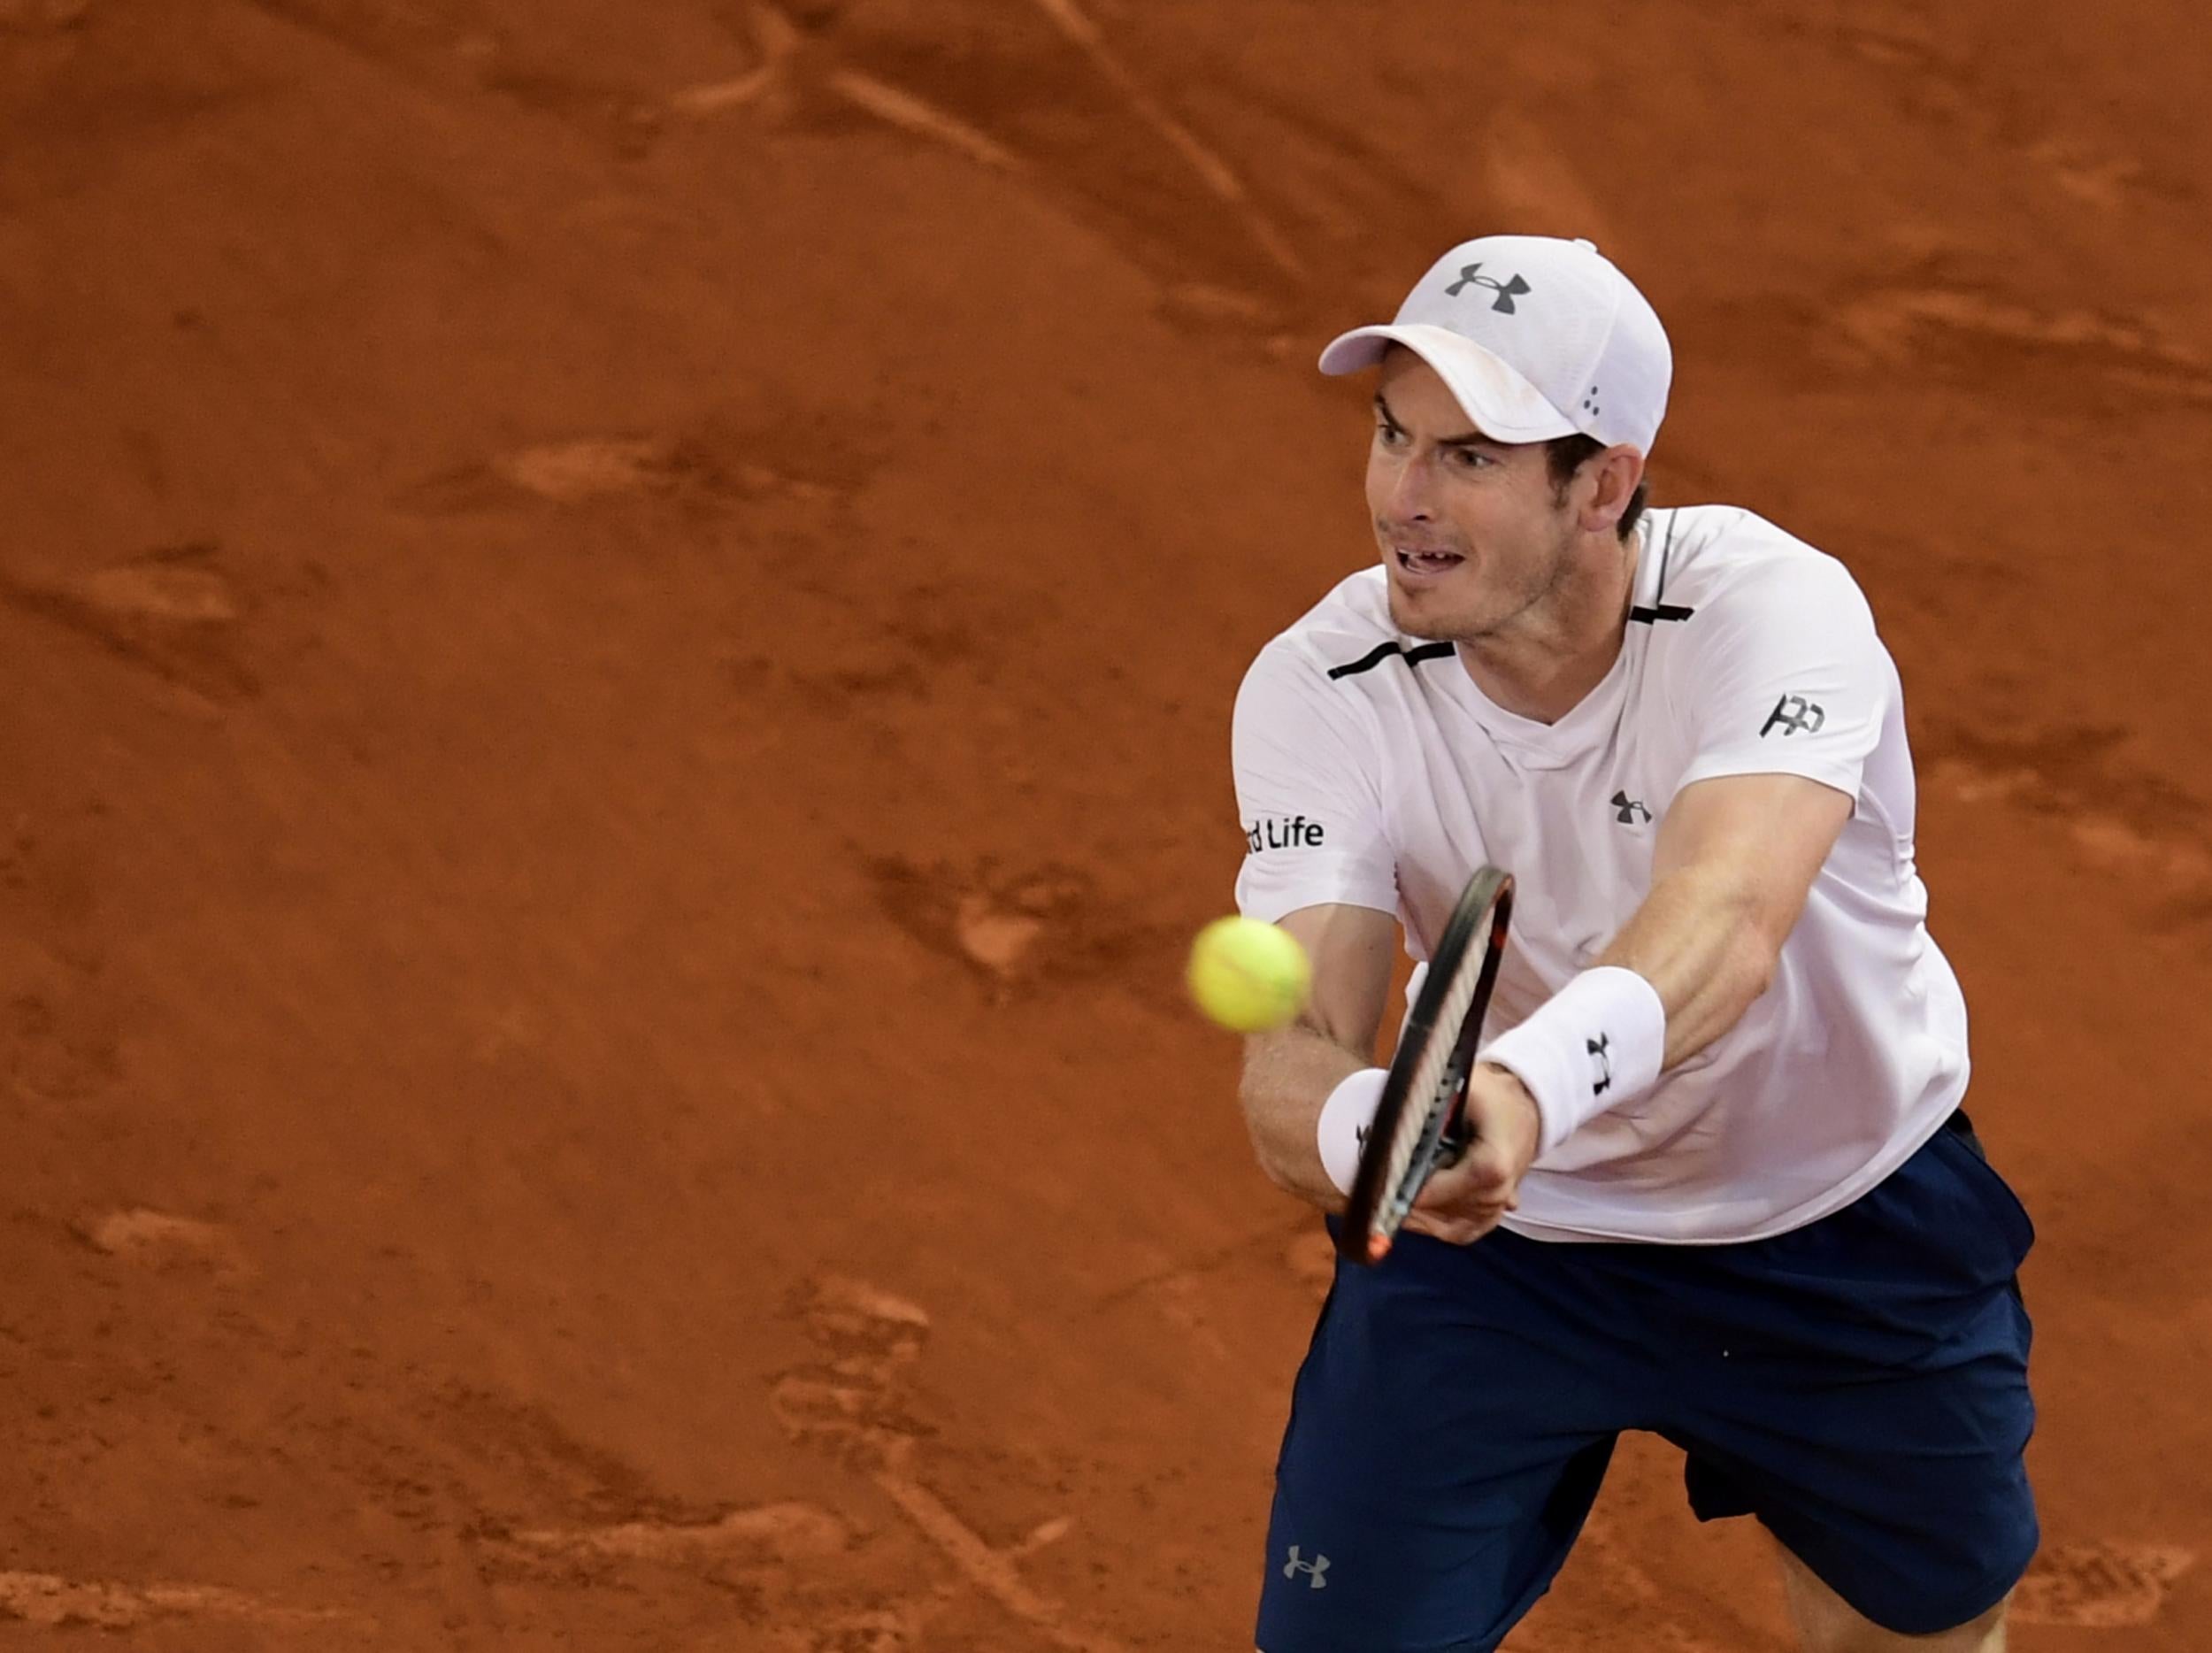 Murray made 55 unforced errors and failed to win a single break point